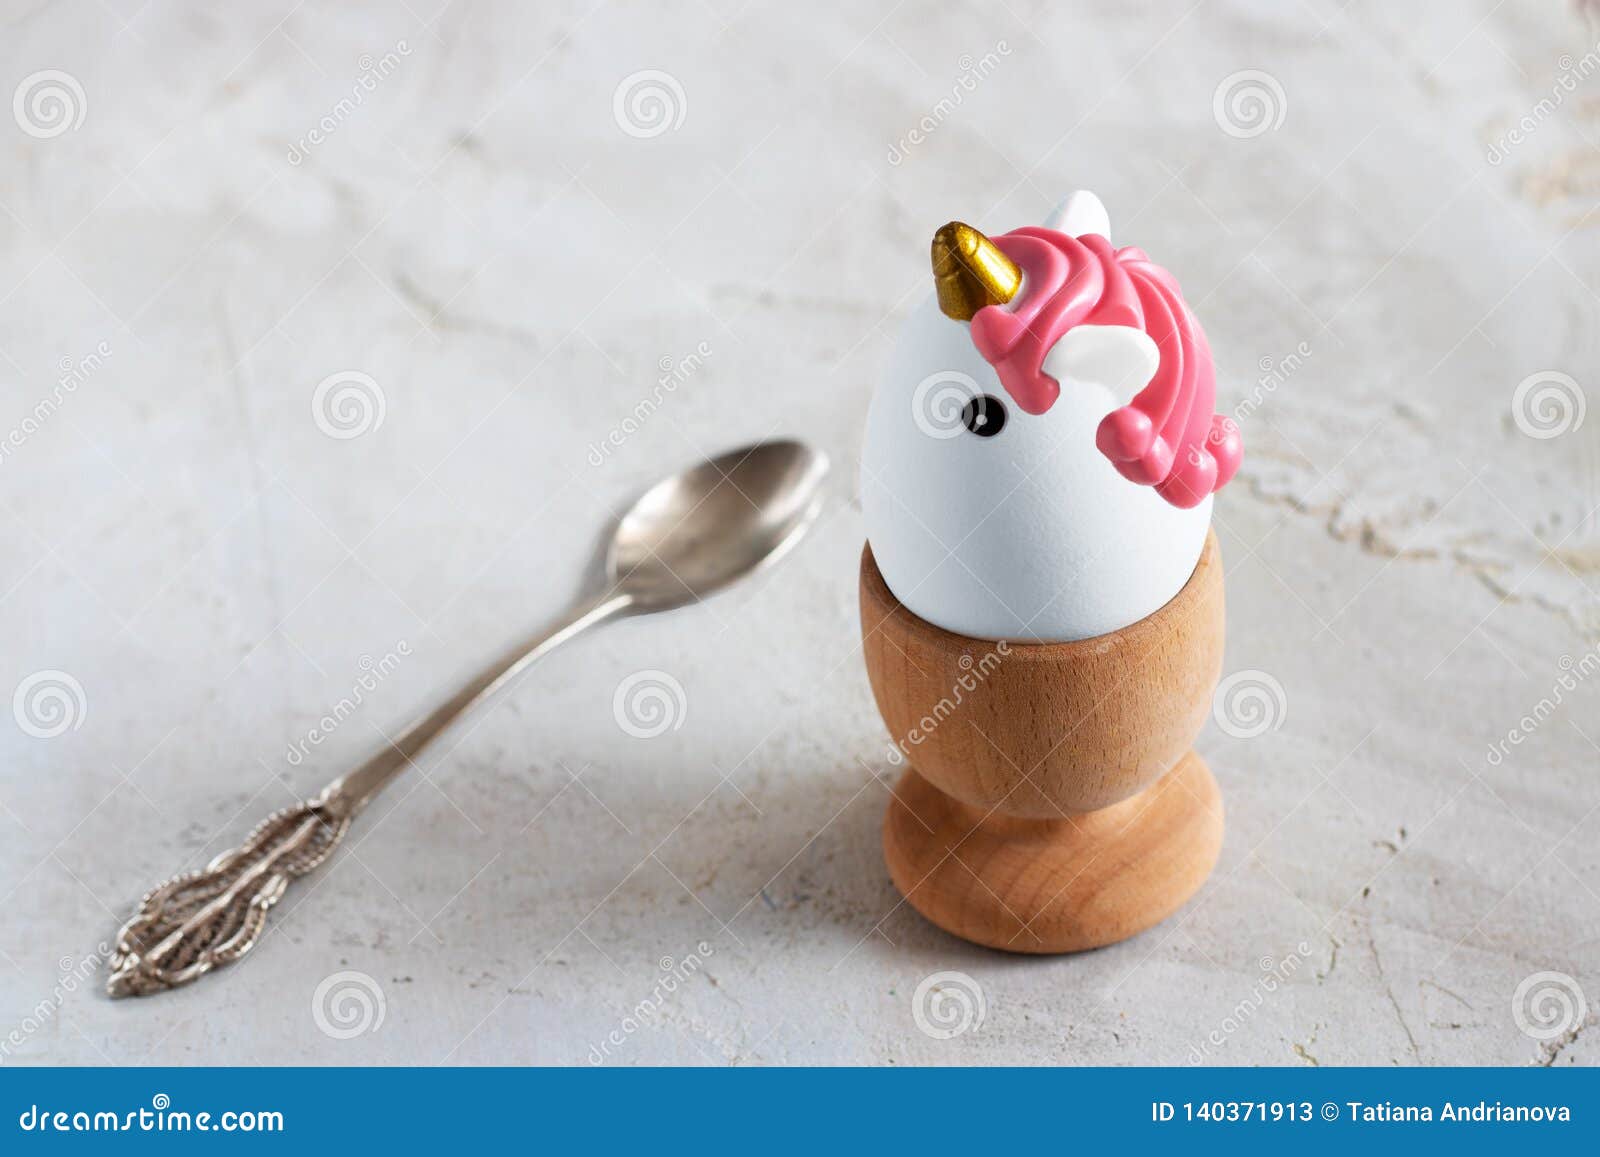 white egg in wooden egg cup and tea spoon on grey cement textured background, horizontal banner, copy space, breakfast, easter,